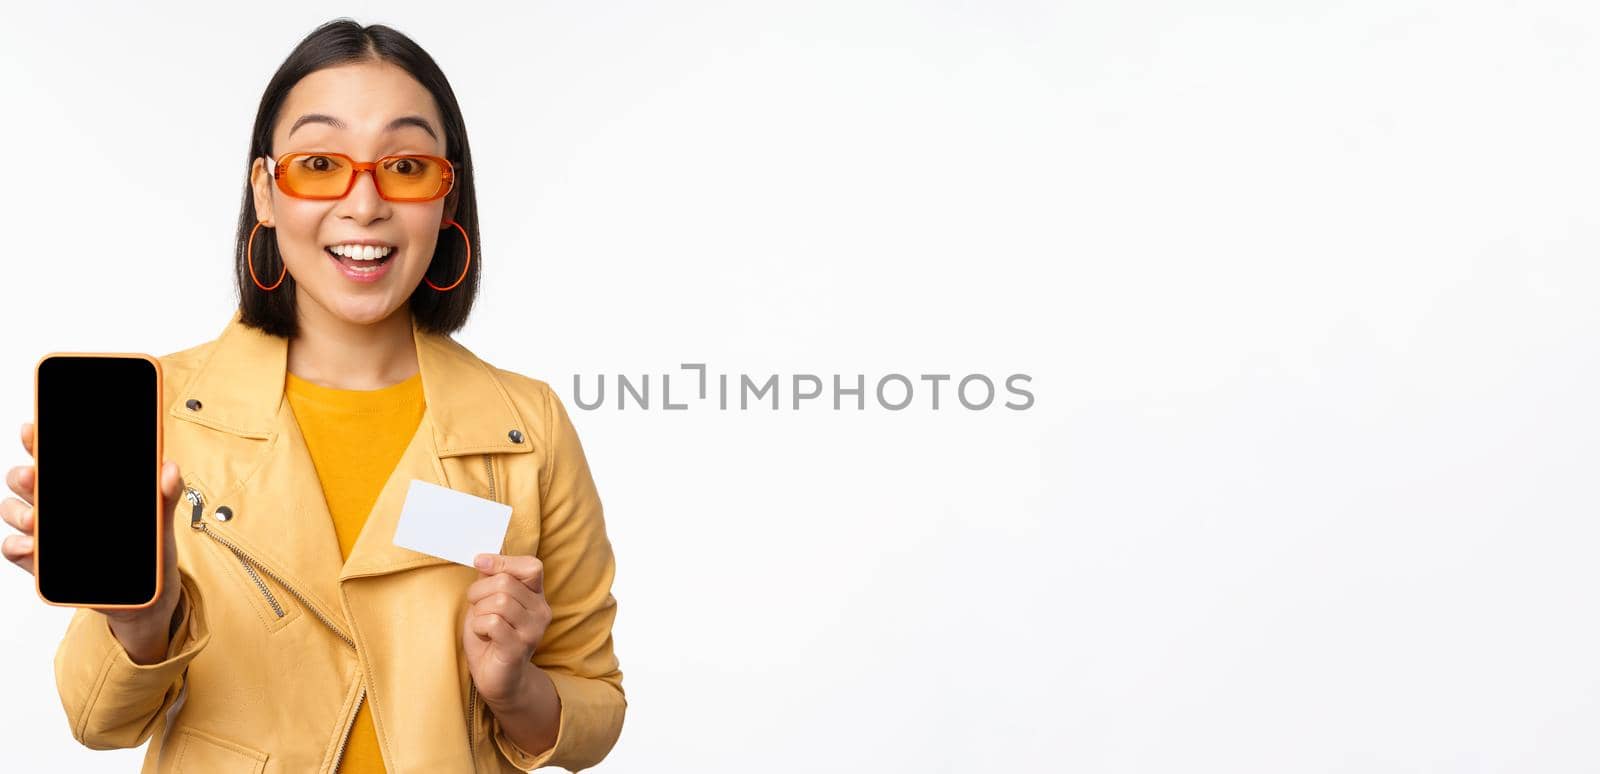 Online shopping and people concept. Stylish asian woman showing mobile phone screen and credit card, smartphone application, standing over white background. Copy space